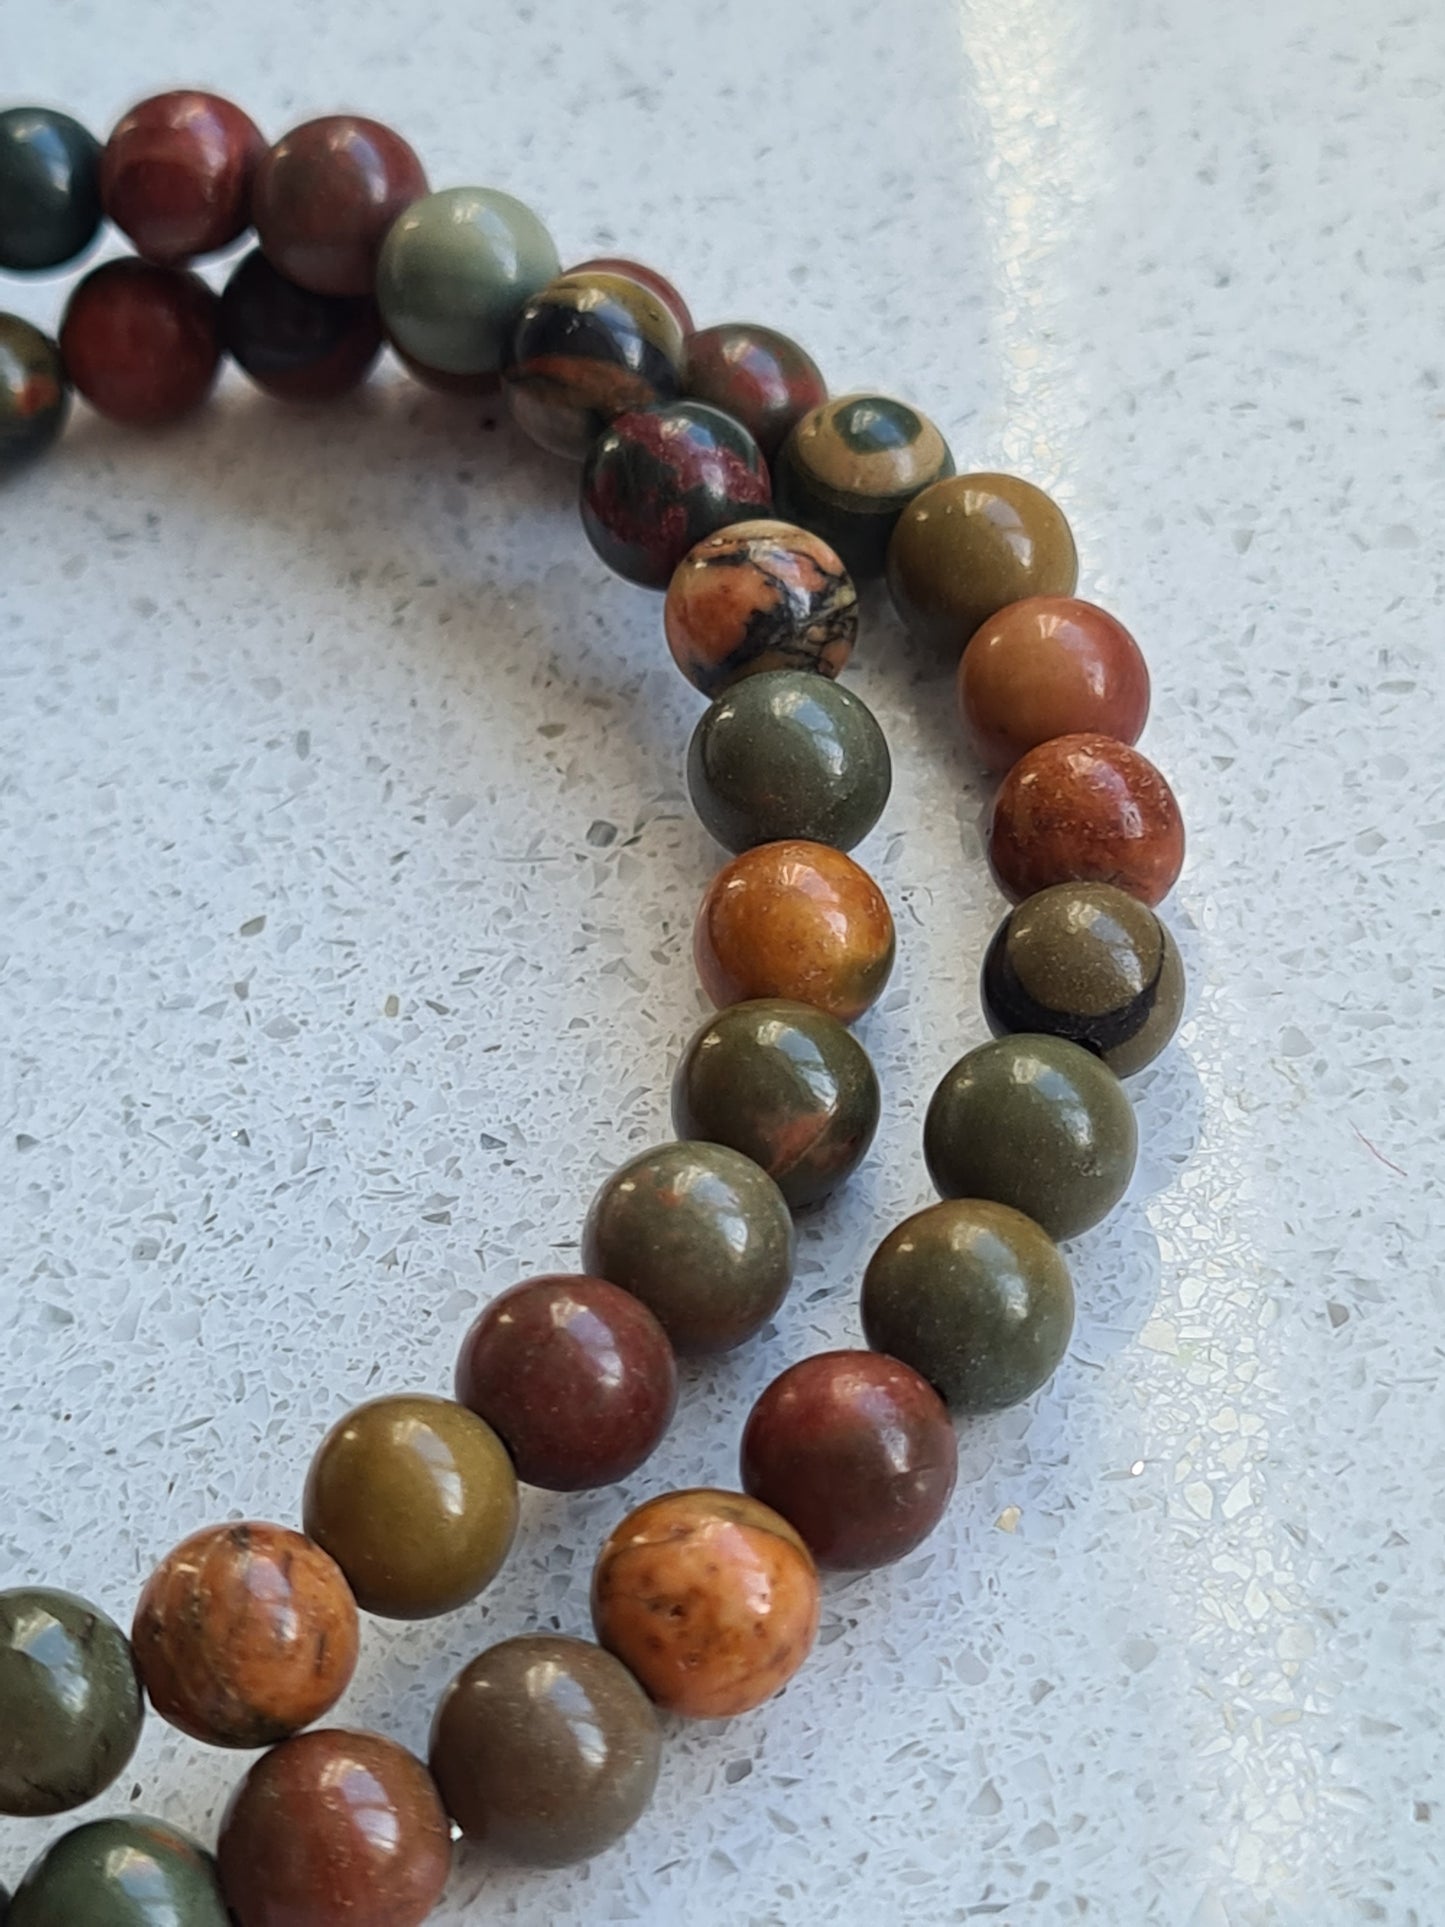 Natural Picasso Jasper 6mm rounded bead elasticated bracelets. Beads in colours of green, orange and red. Shown on white quartz background.